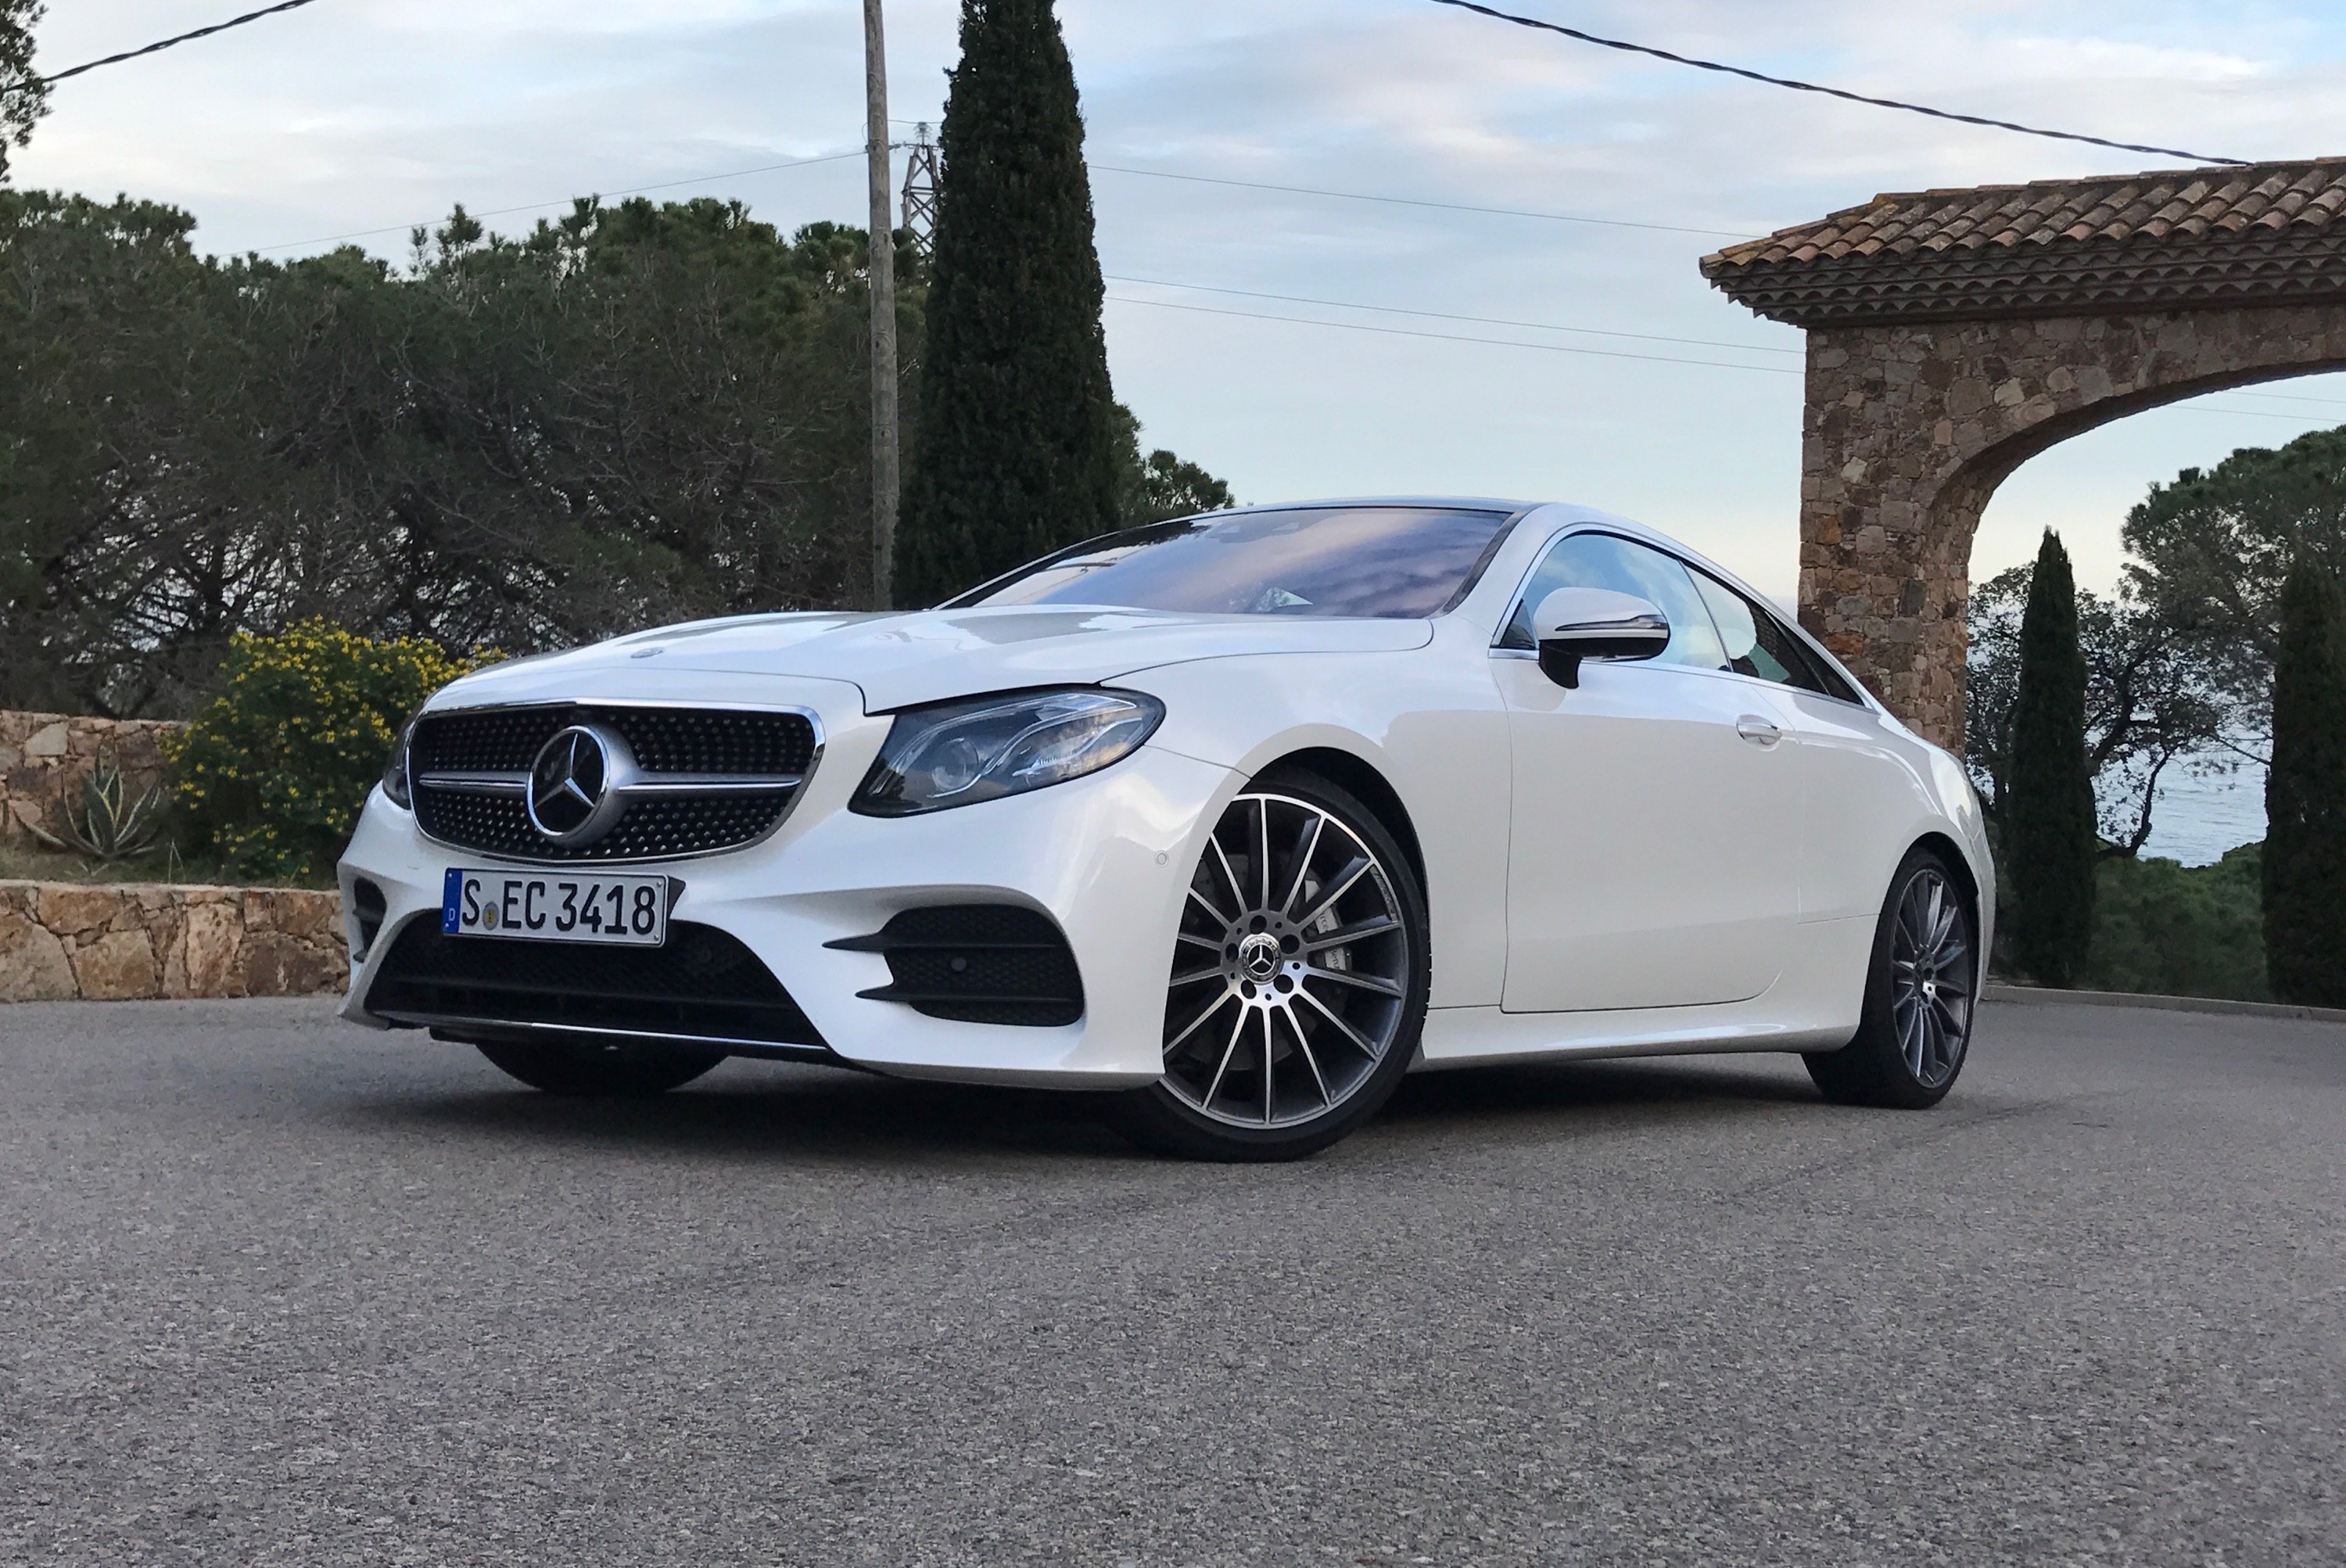 Mercedes E-Class Coupe (C238) hd specifications